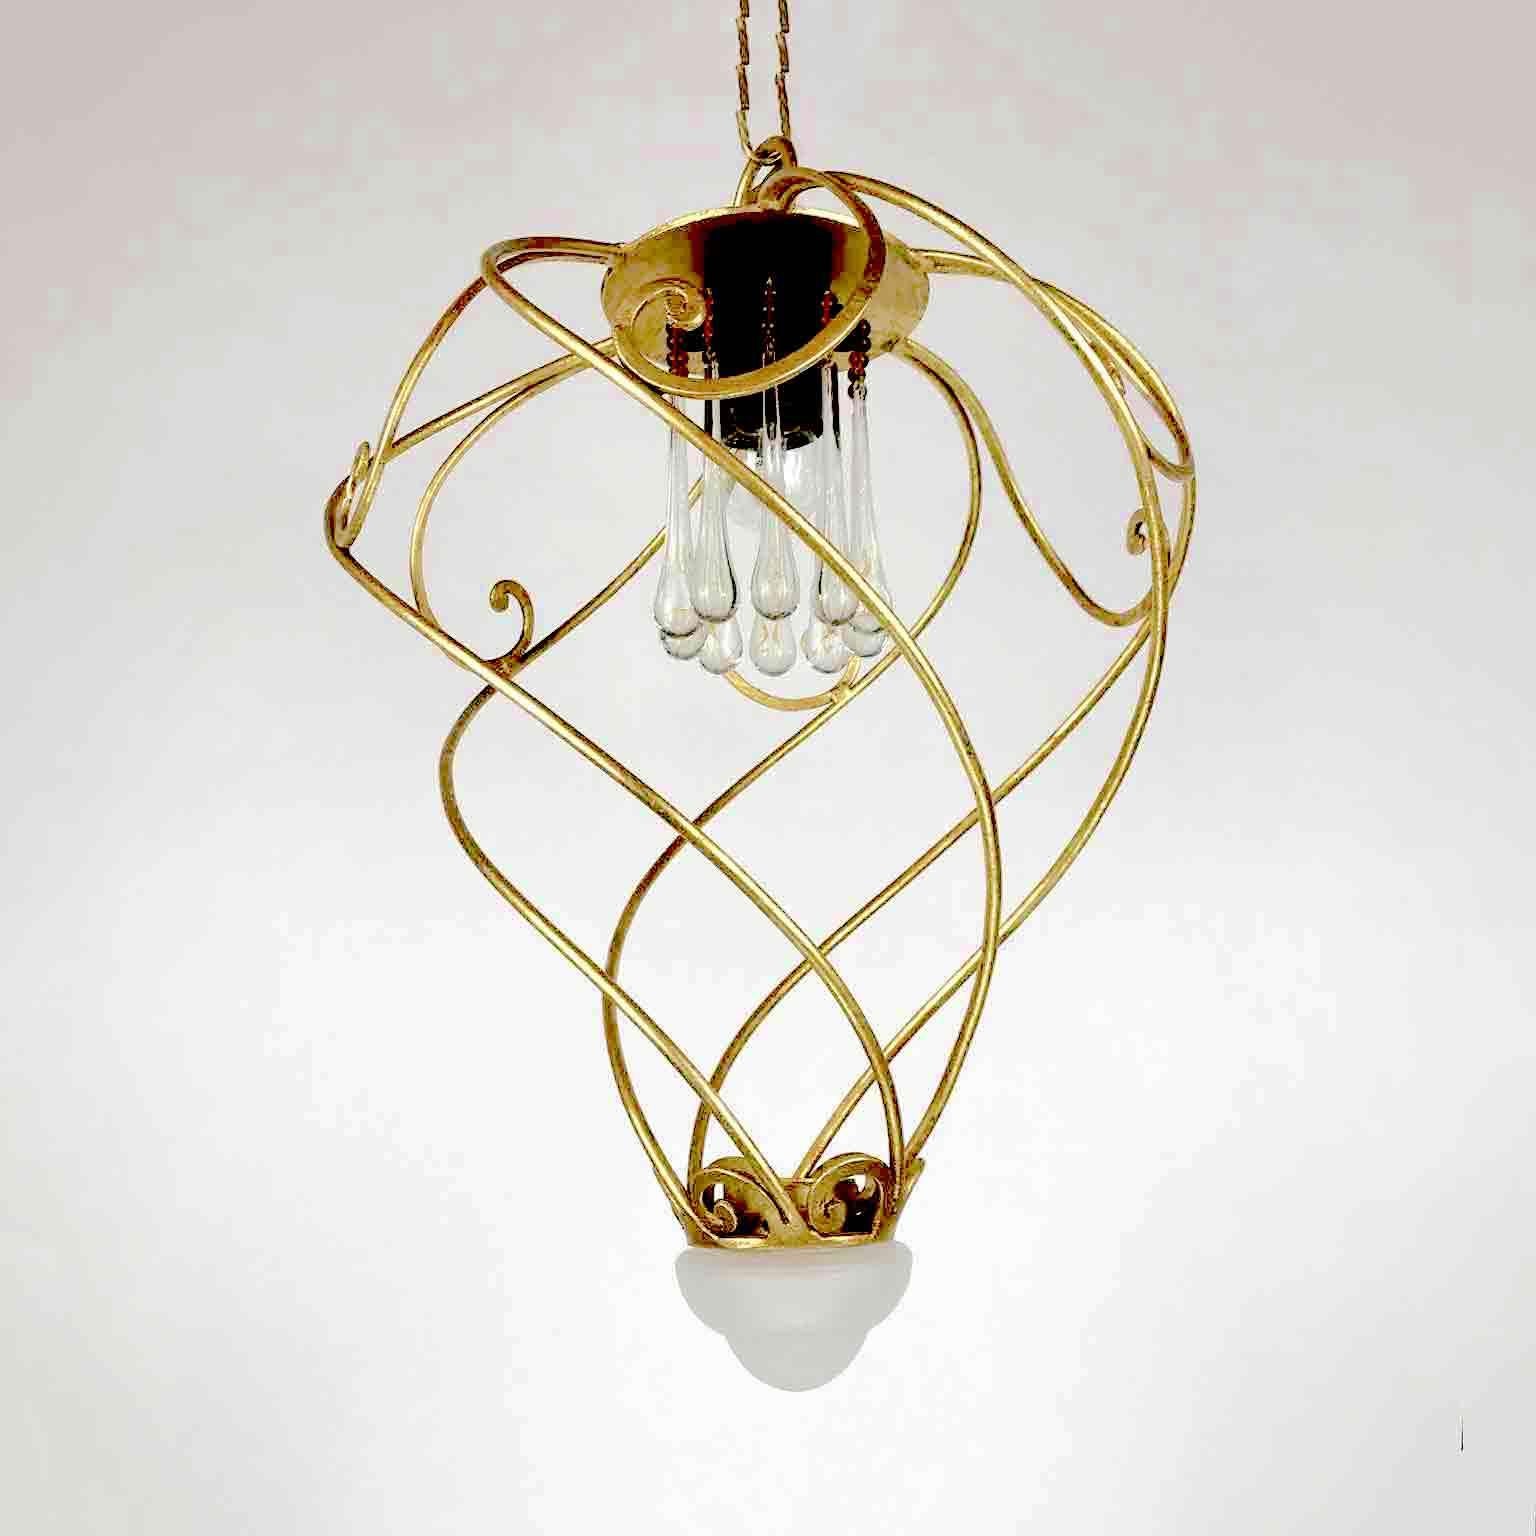 Vintage Italian Florentine chandelier with a leaf-gilded iron structure, cage shaped realized with spiral scrolls decorated with a finial frosted glass elements, the E27 light in the upper part is surrounded by a ring of crystal pendant drops. This